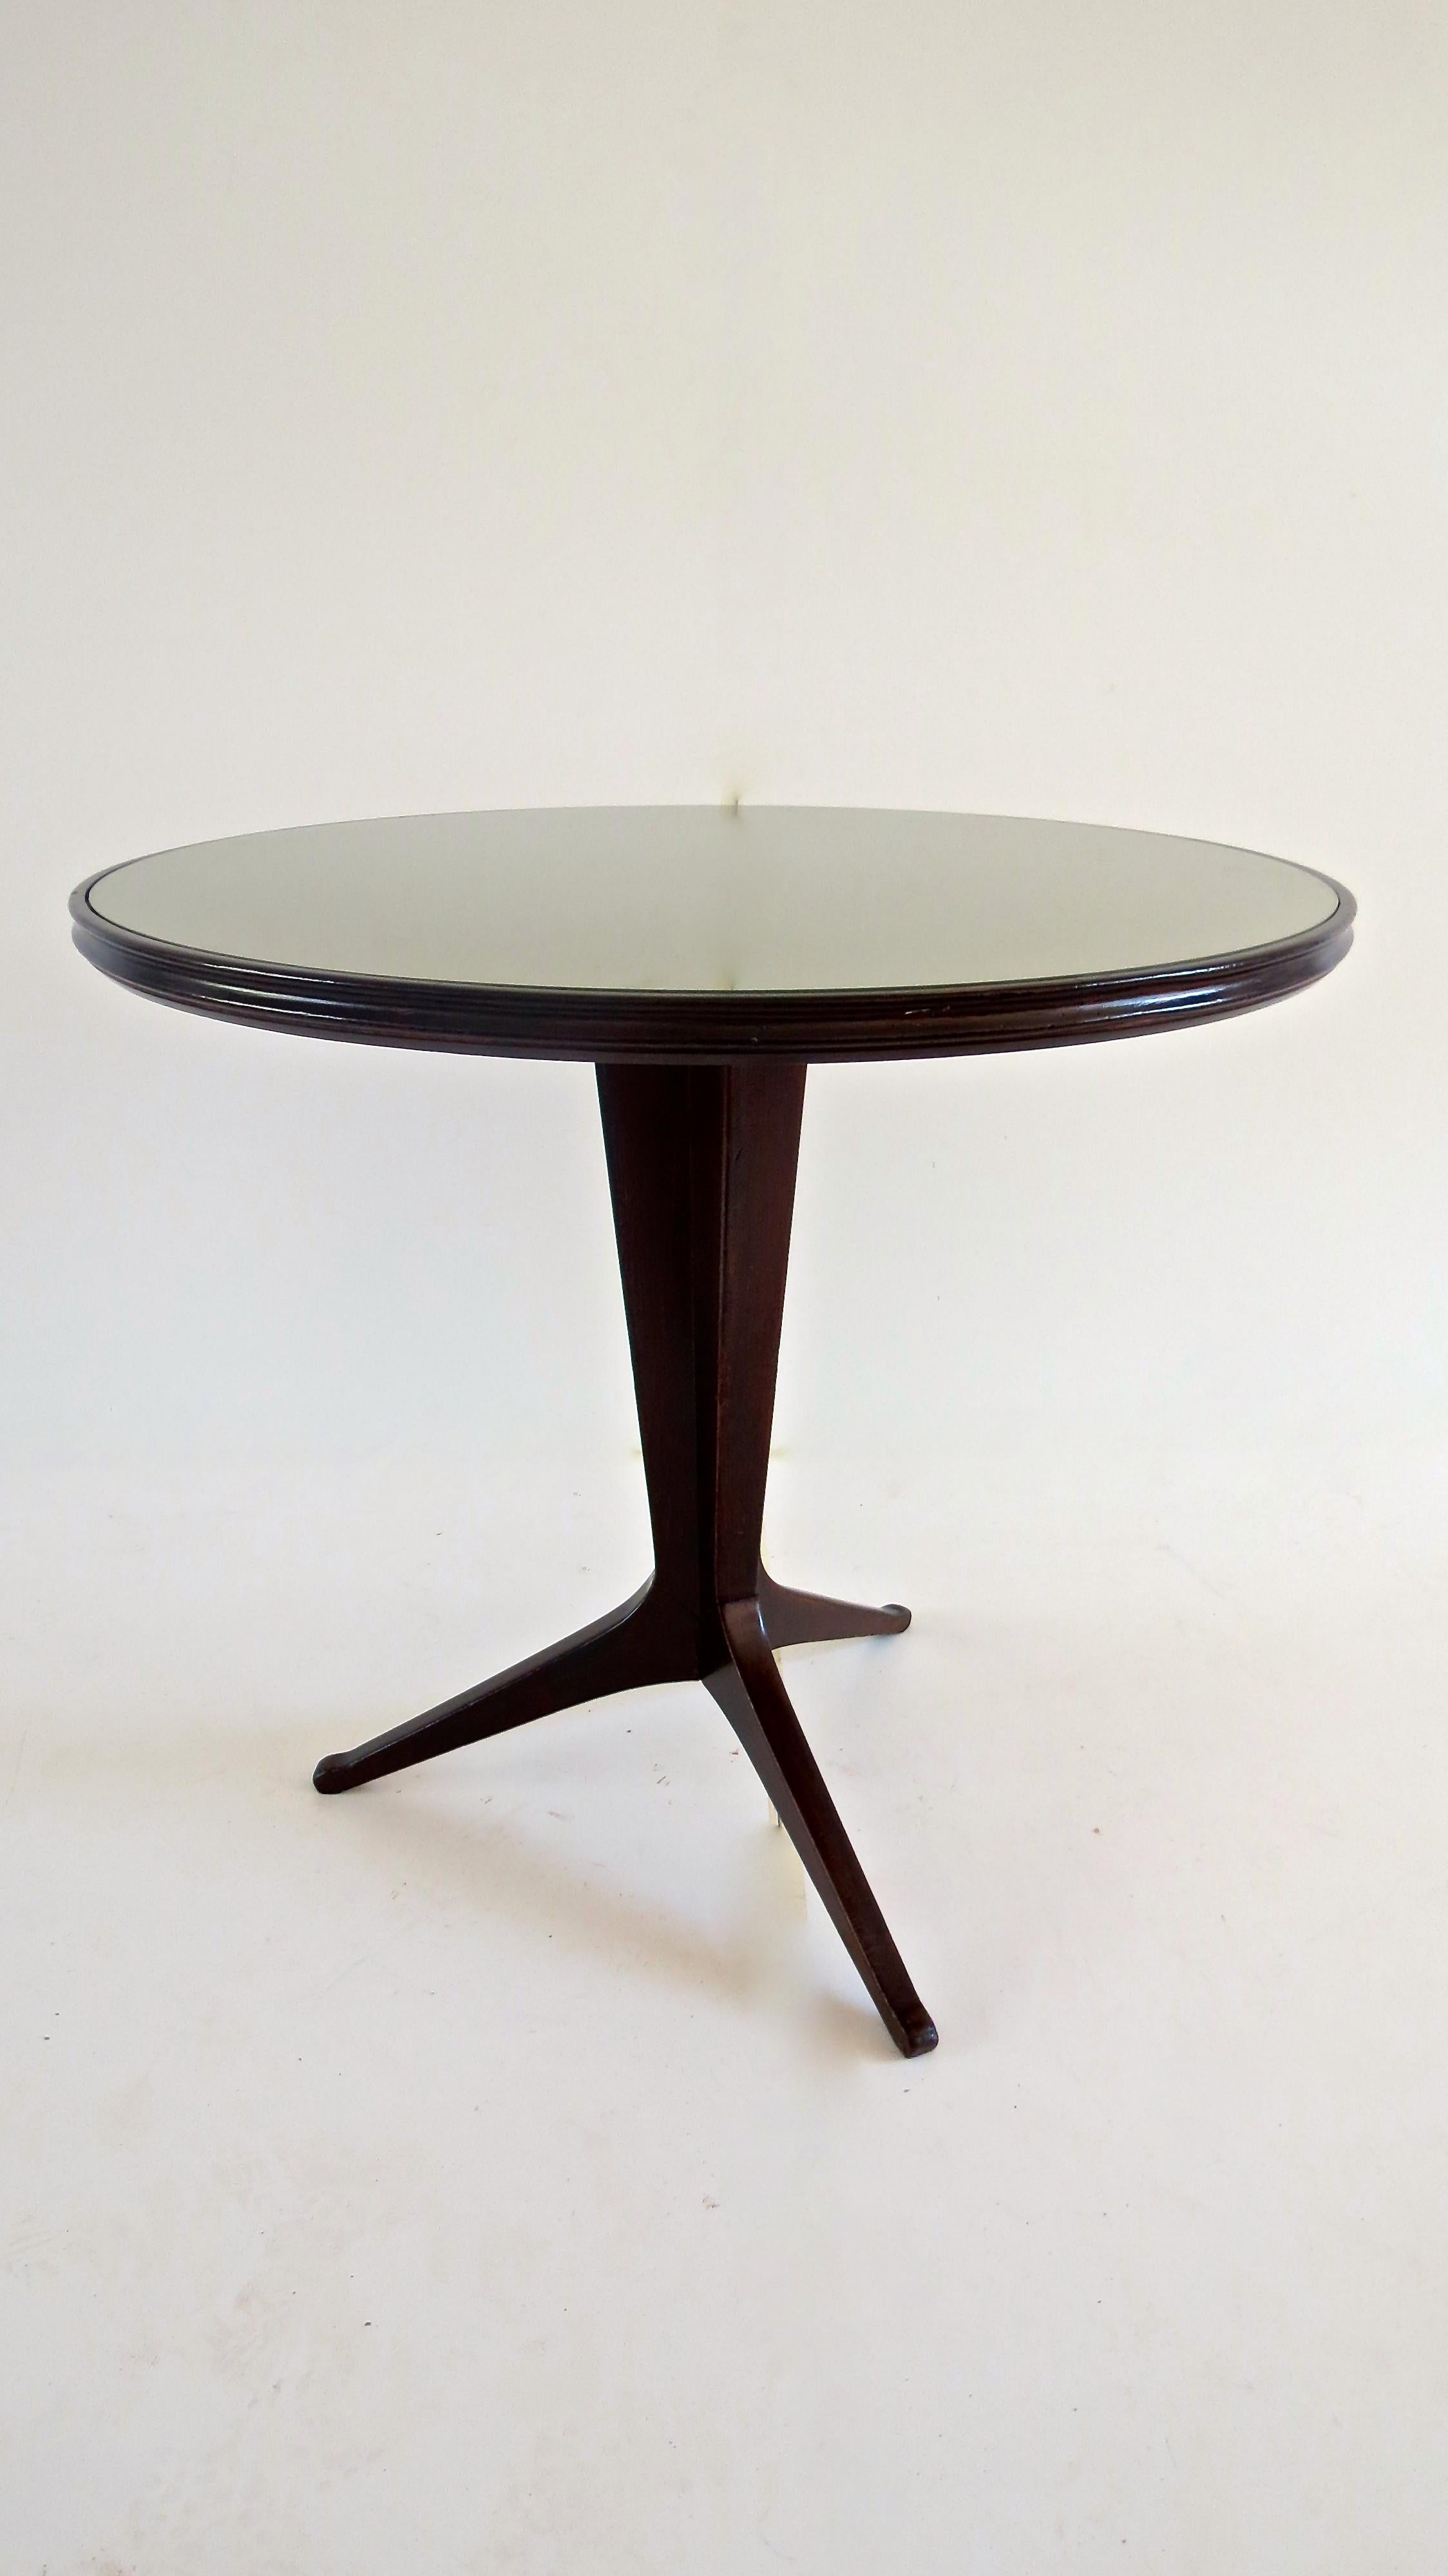 Elegant round table, three feet attributed Ico Parisi, circa 1950
glass on top
walnut, glass
good condition, some little signs on the board of the top
Measures: Diameter 90 cm, height 80 cm.